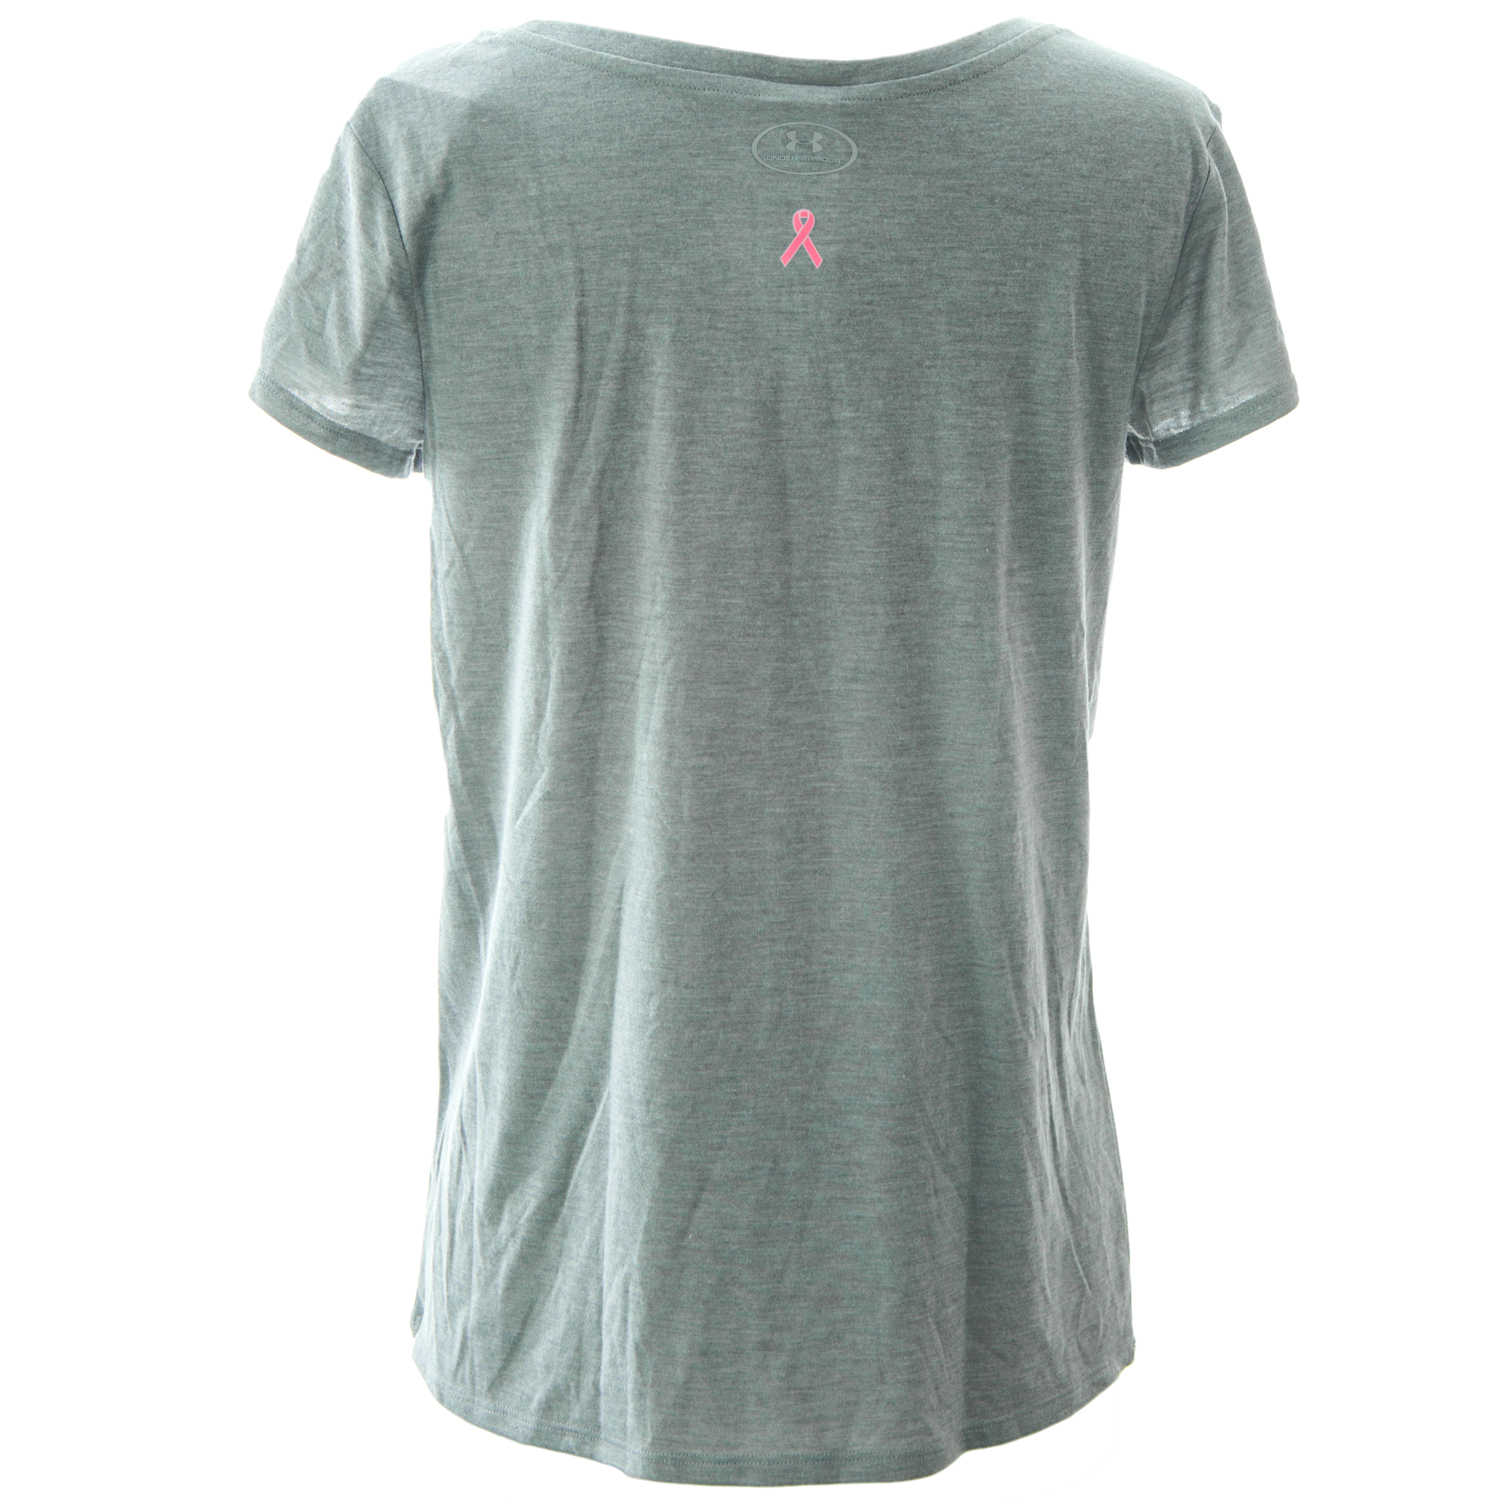 Under Armour Women's Power in Pink "I Fight For" T-Shirt Small Heather Grey - image 2 of 2